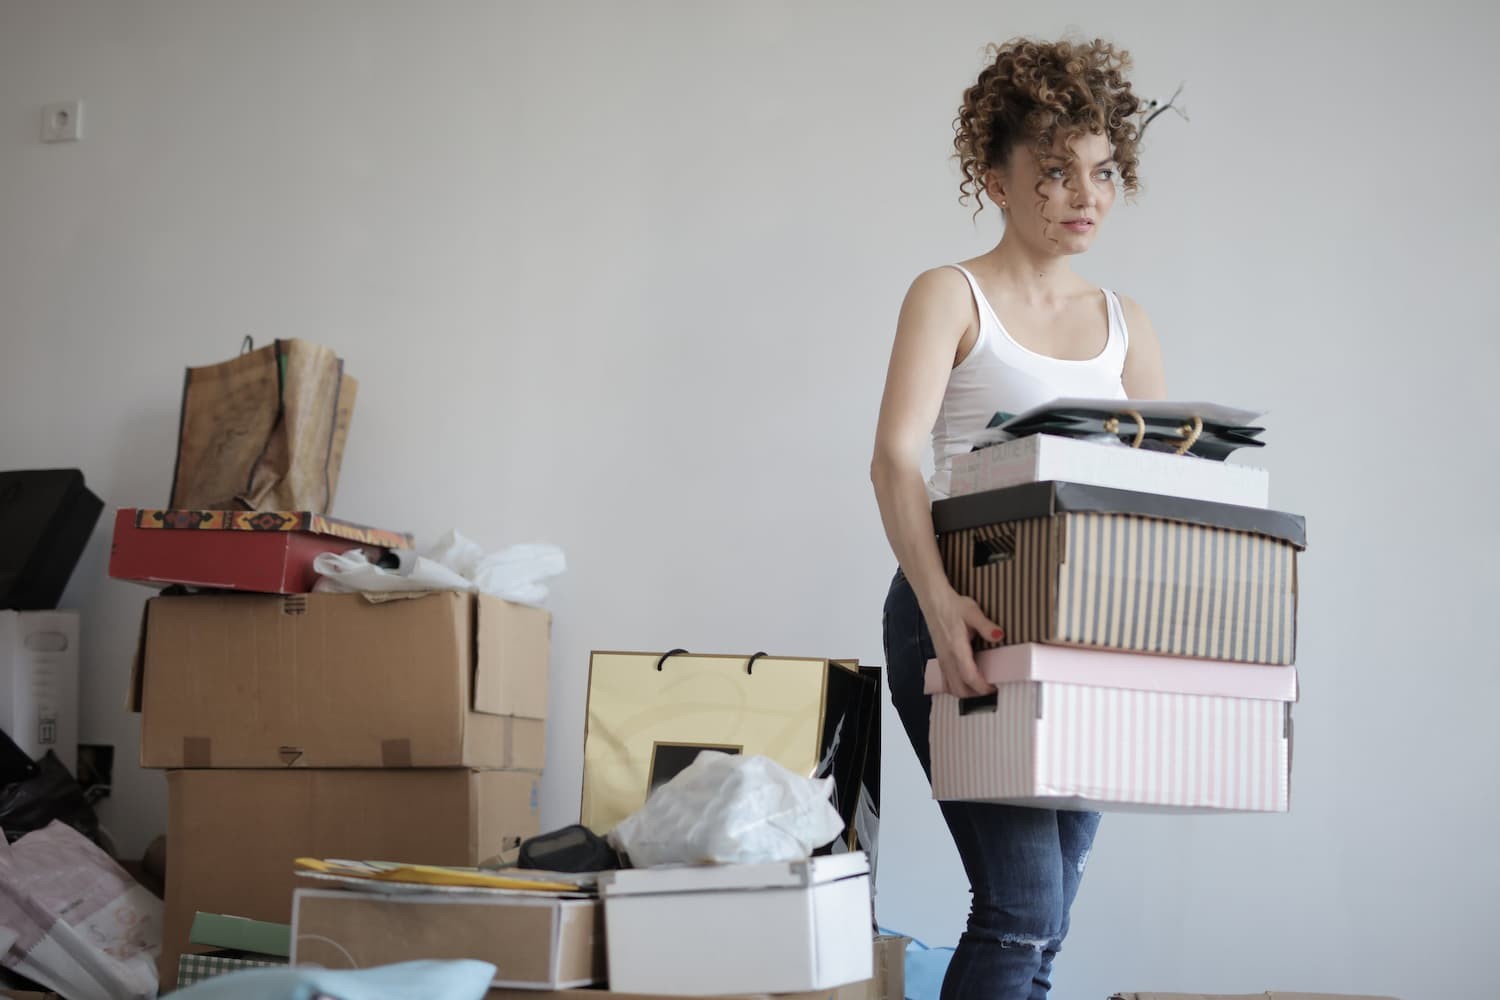 Hoarding Disorder: What You Need to Know